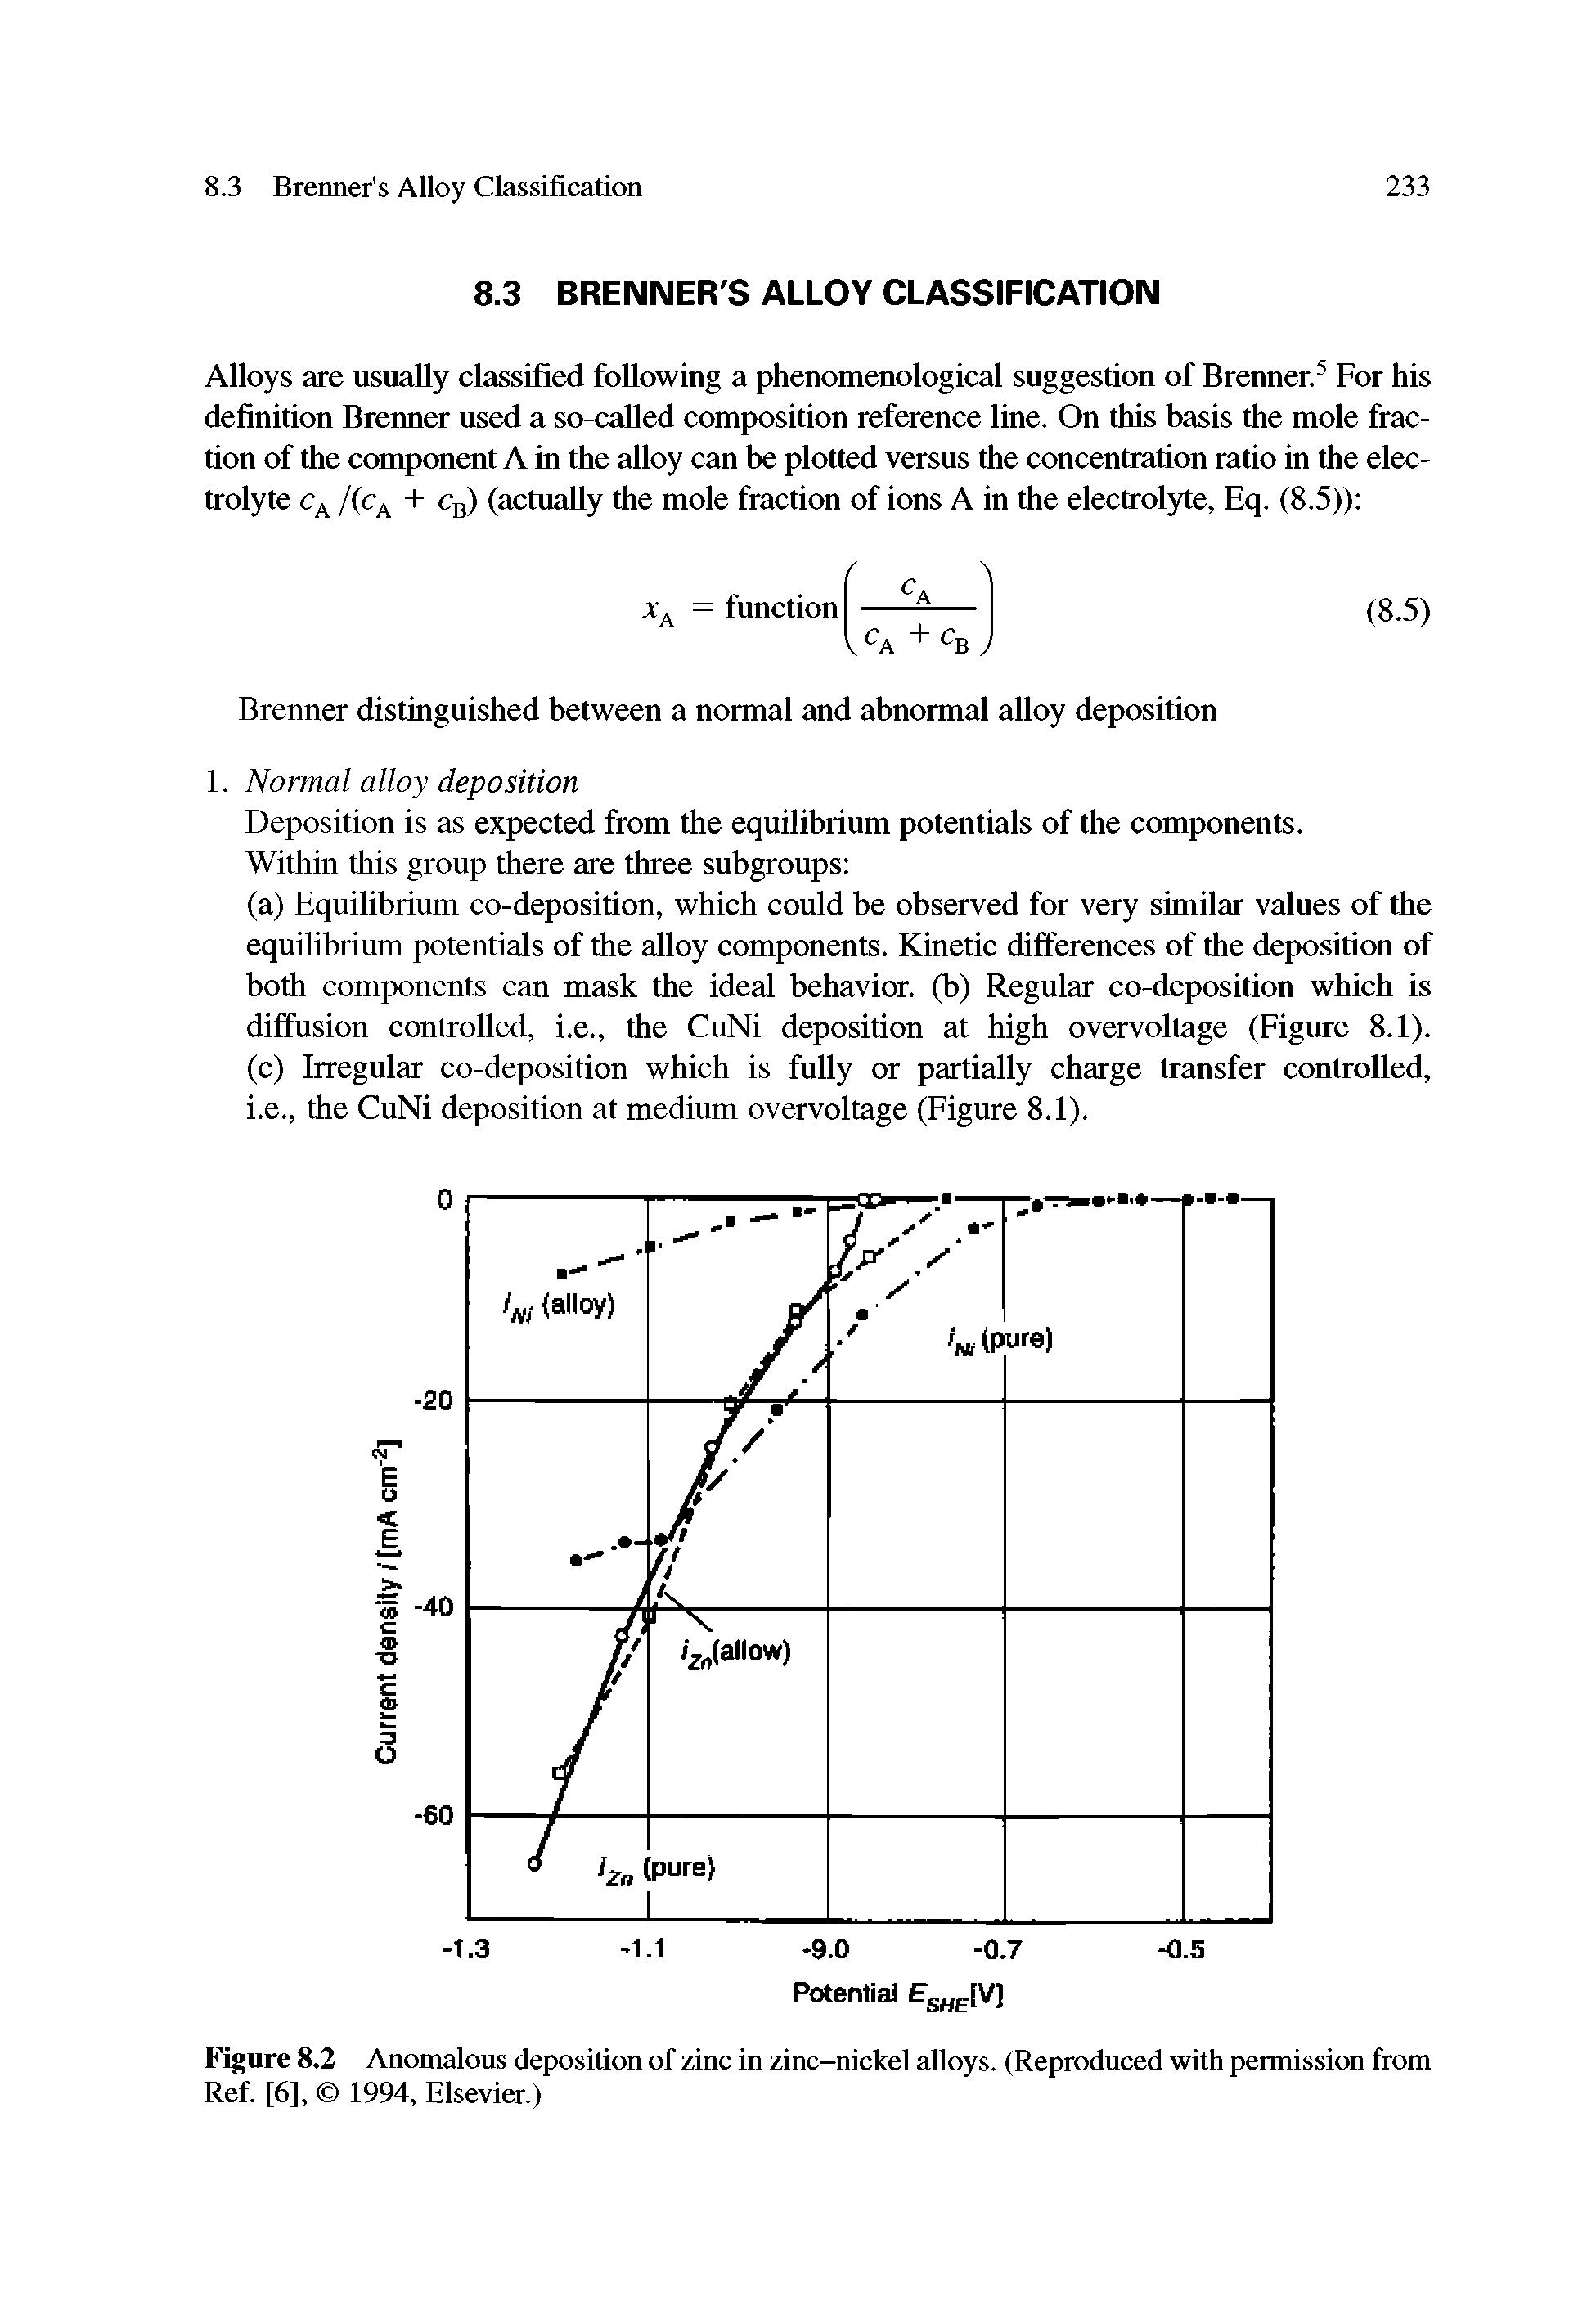 Figure 8.2 Anomalous deposition of zinc in zinc-nickel alloys. (Reproduced with permission from Ref. [6], 1994, Elsevier.)...